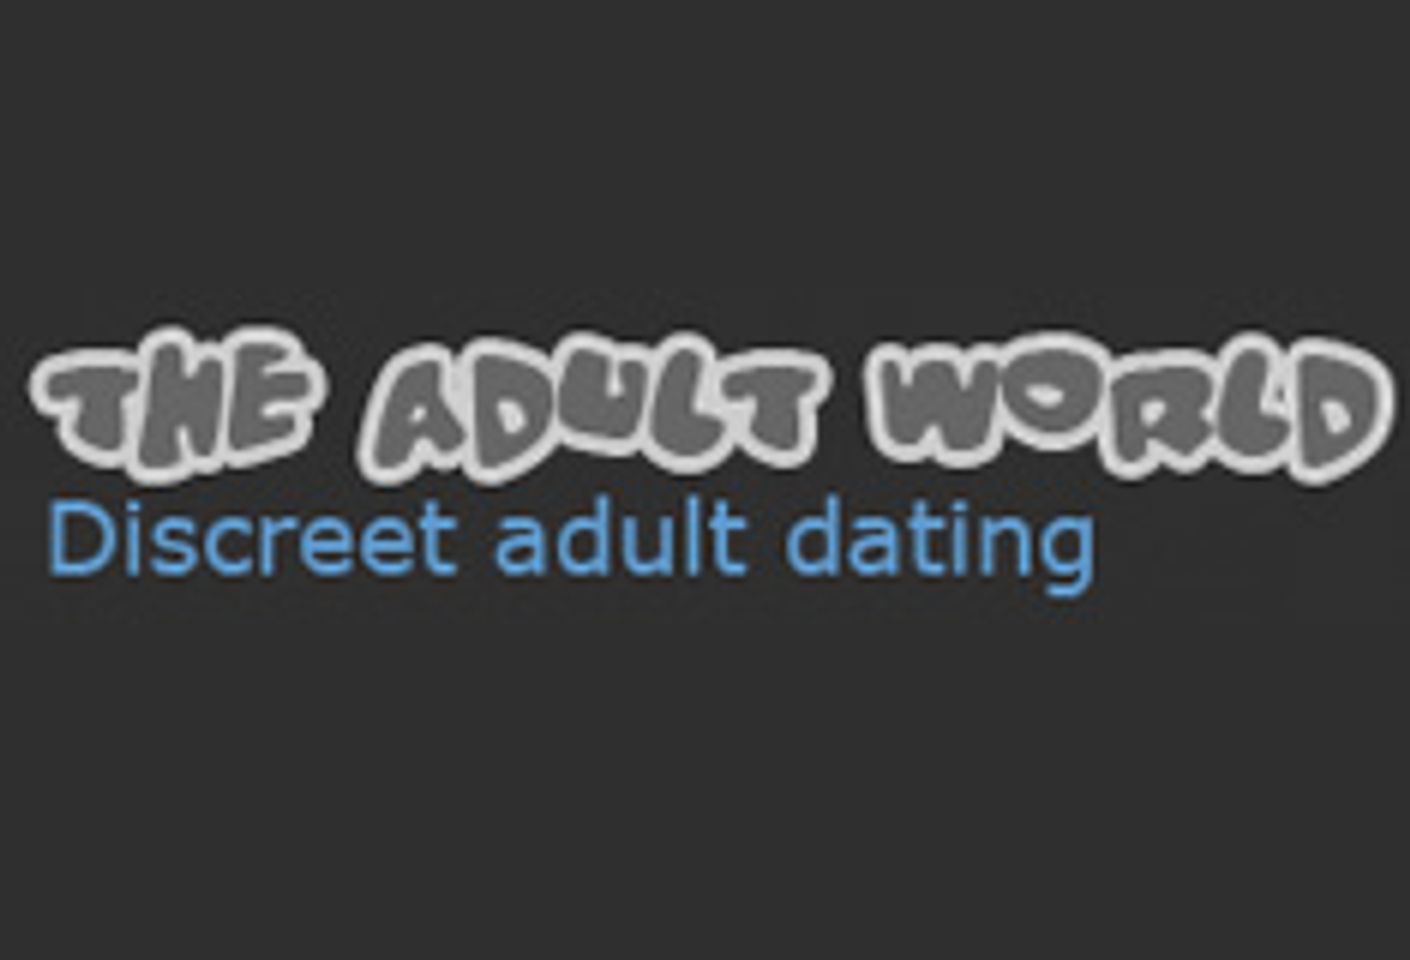 The New Adult World Networking Site Offers Free Registration